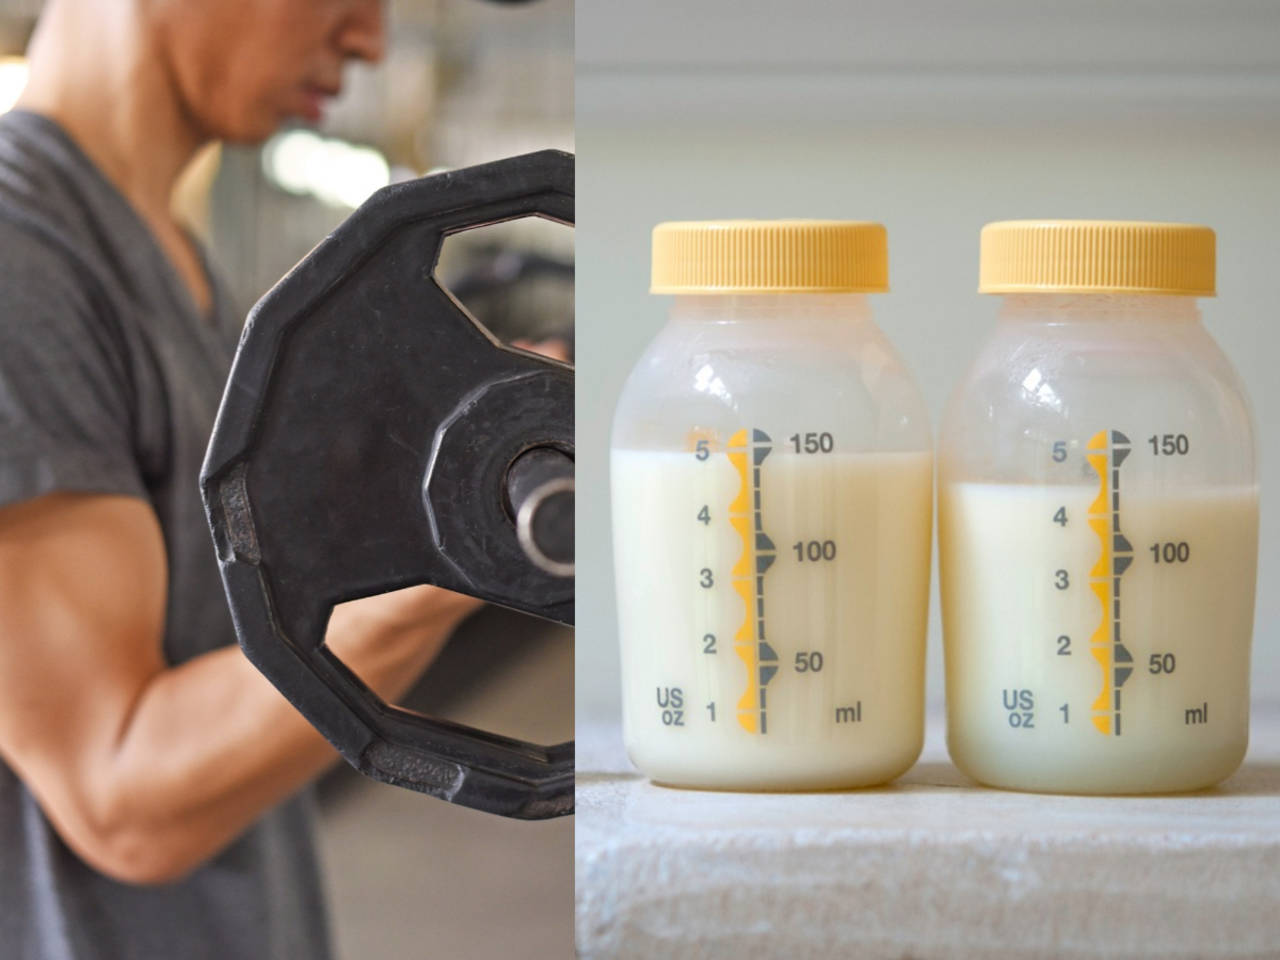 Shocking! Some men are now drinking breastmilk to build muscles image